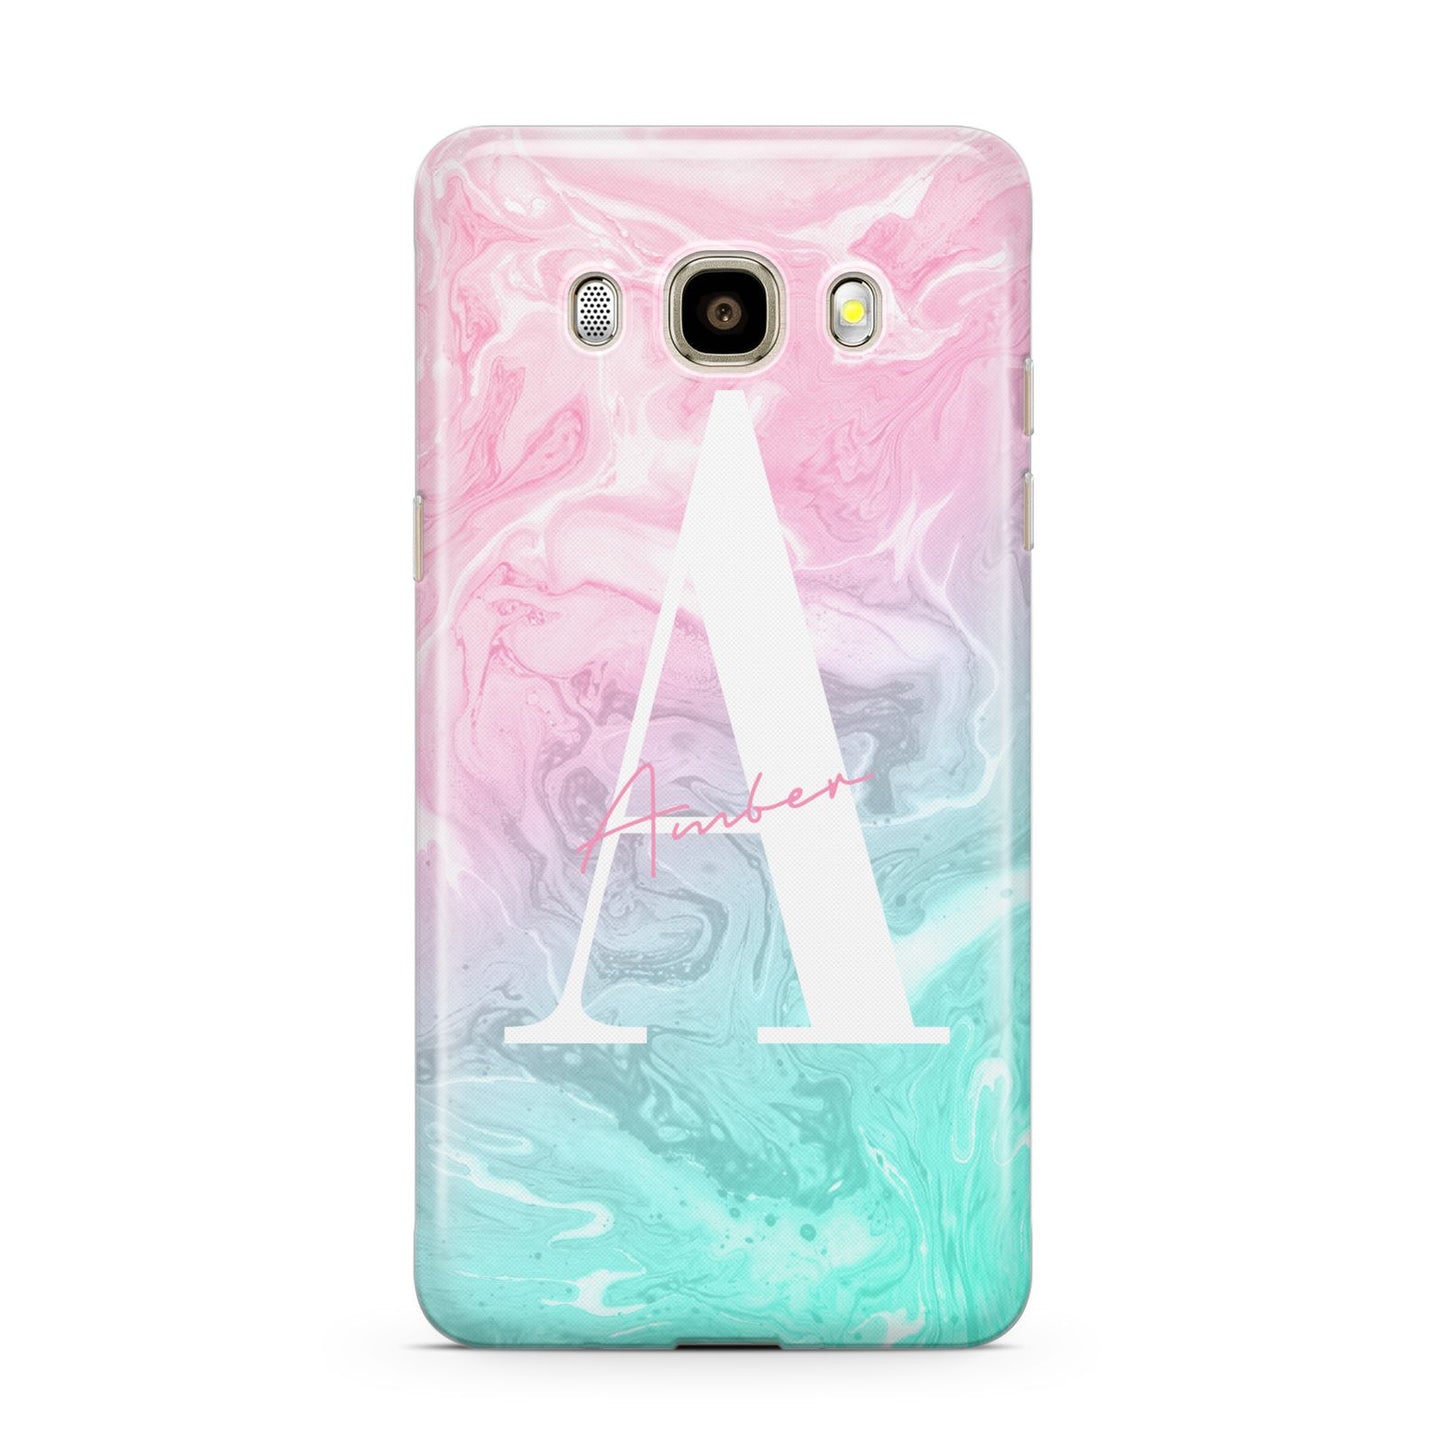 Monogrammed Pink Turquoise Pastel Marble Samsung Galaxy J7 2016 Case on gold phone